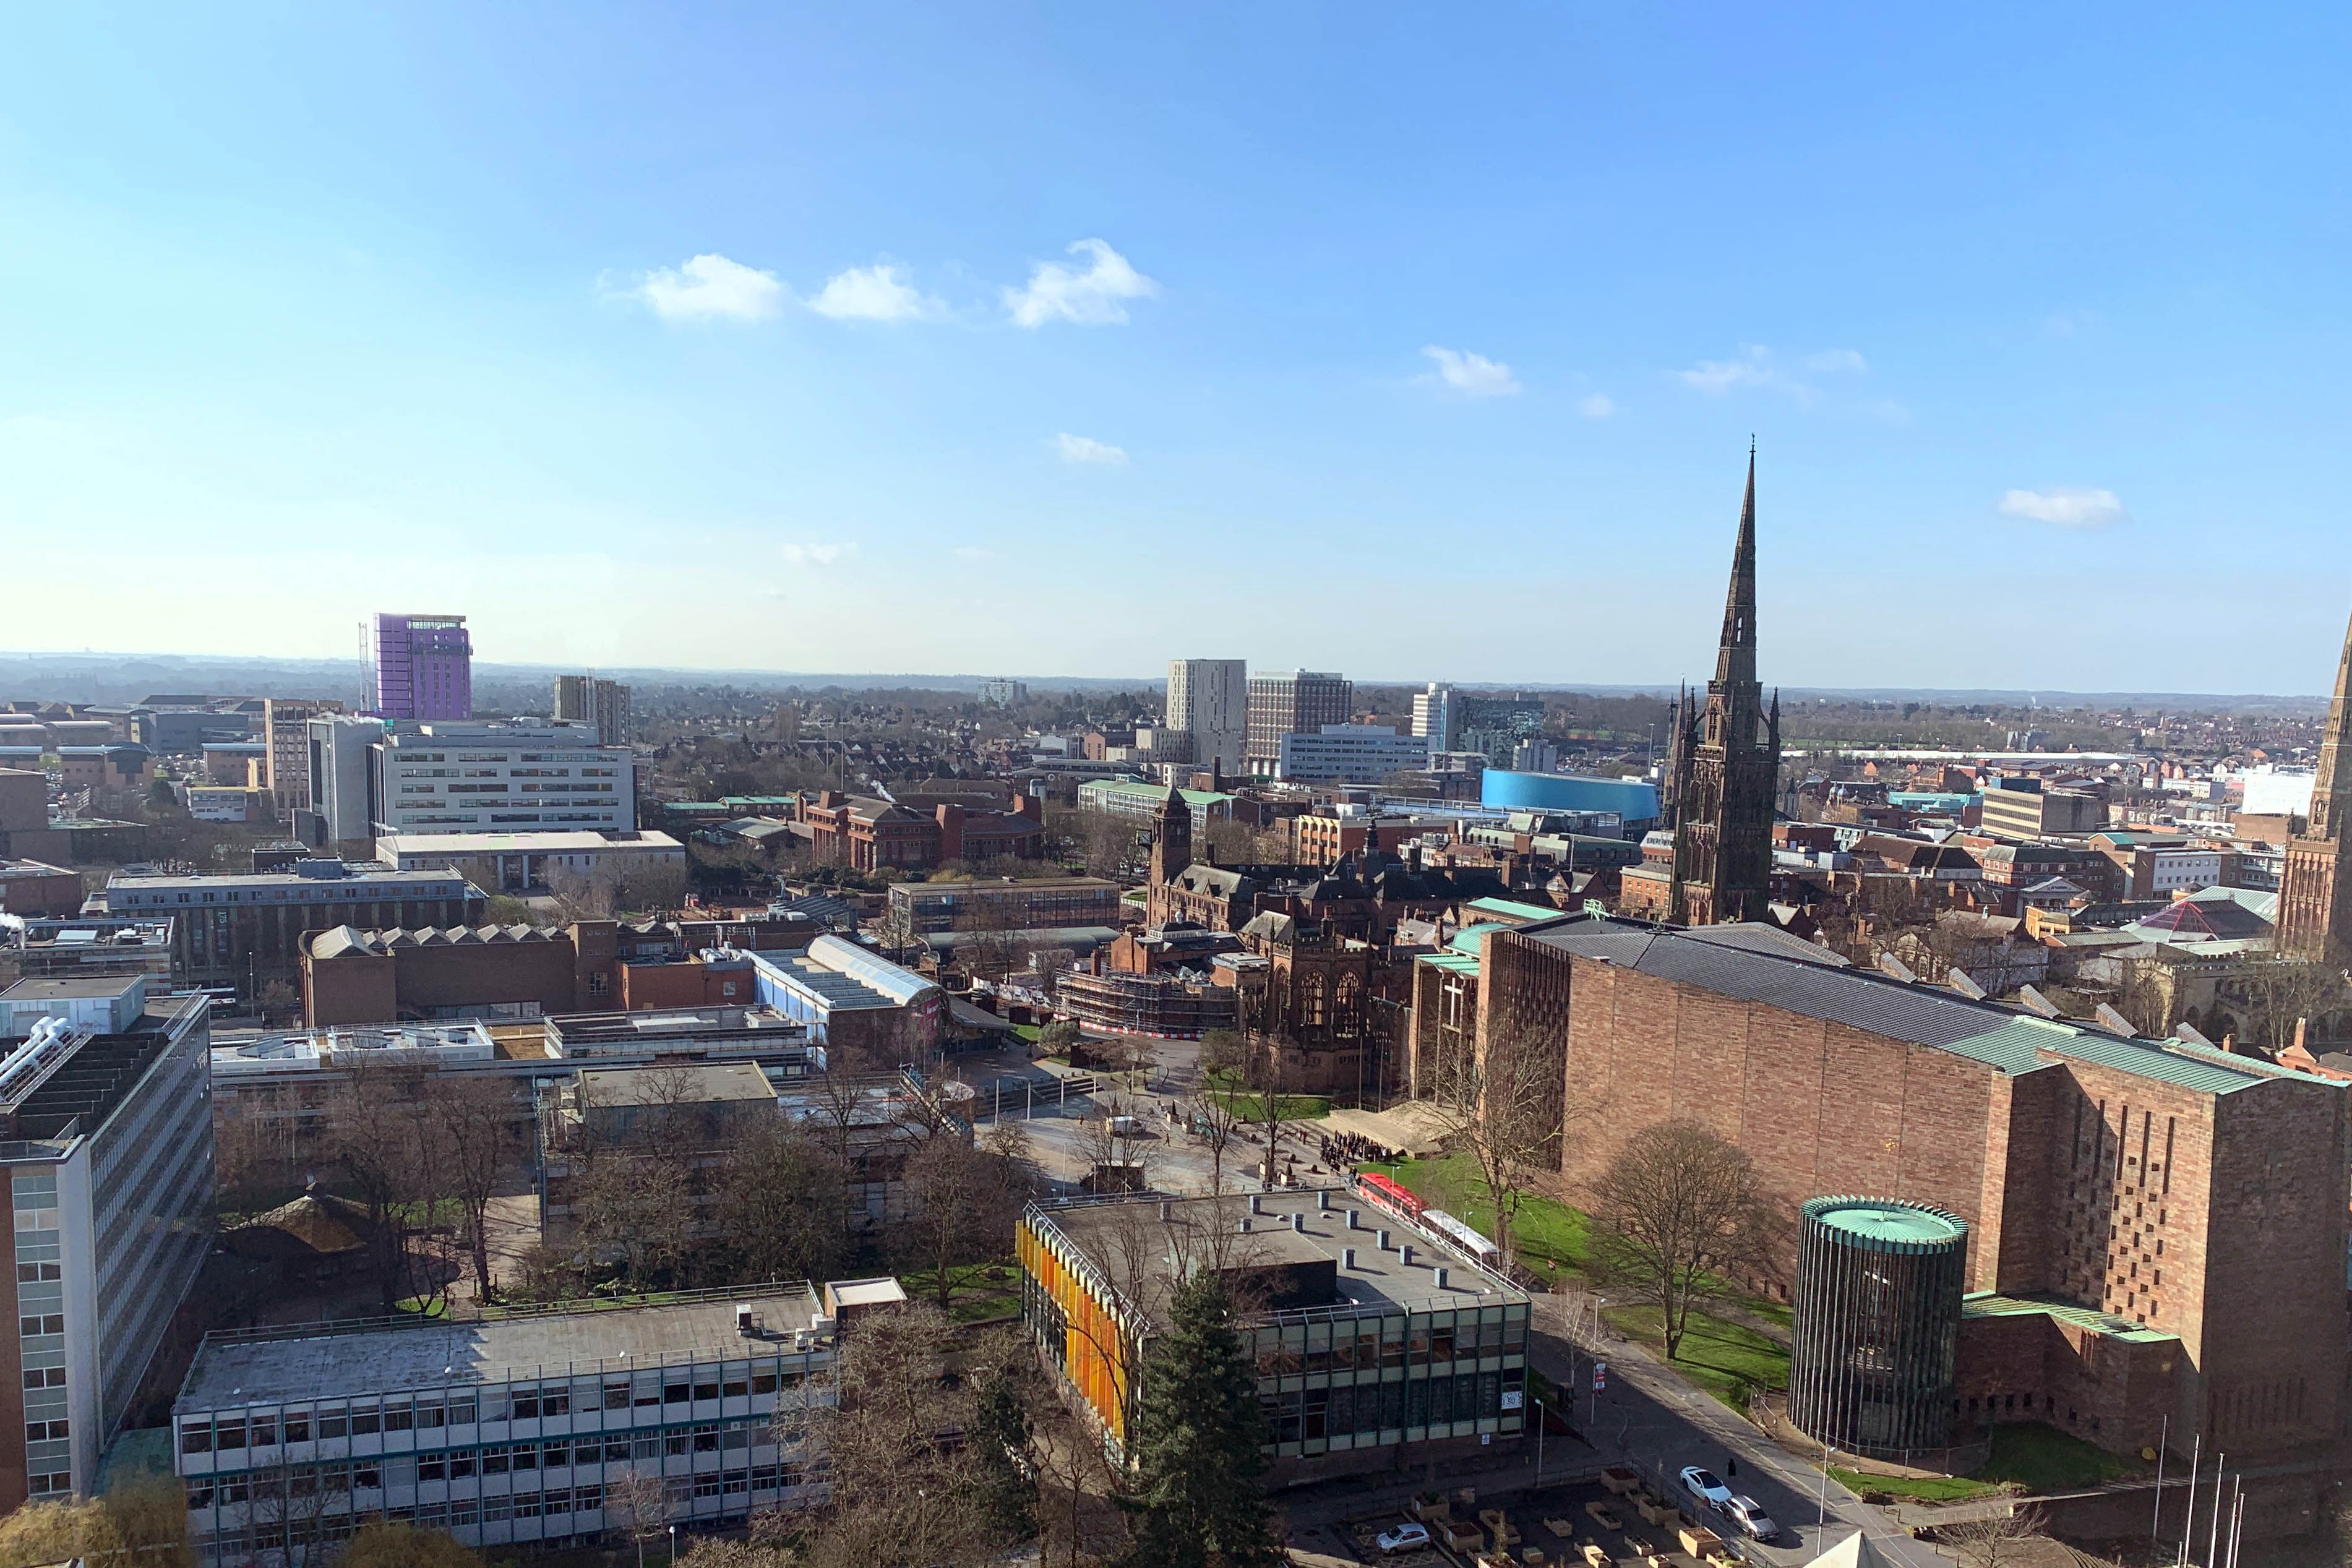 View from Penthouse Deluxe Studio flats over Coventry University and the city's famous cathedral